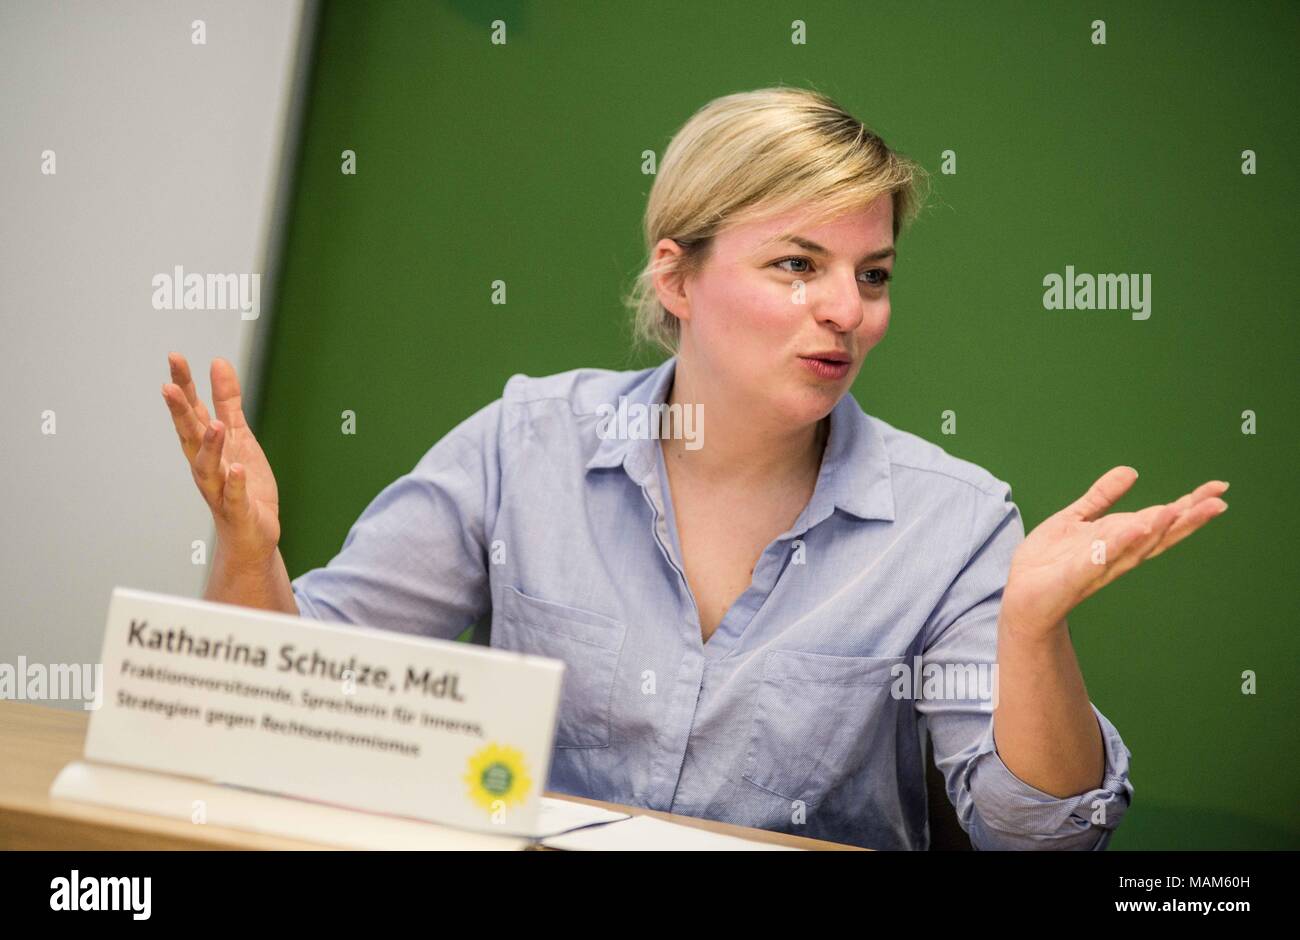 Munich, Bavaria, Germany. 3rd Apr, 2018. Bavarian Lantag (Parliament) member from the Gruene Fraktion (Green Party Fraction) held a press conference ahead of the release of the newest Bavarian Verfassungsschutz (Secret Service) report. Schulze has, among other areas, right-wing extremism as her areas of focus and presented her report on the dangers of the right-wing spectrum in Bavaria and Germany, including acts of extremism and terror against foreigners, refugees, refugee helpers, politicians, and other targets. In 2017, there were a total of 1,829 right-extremist crimes. 18 times refug Stock Photo